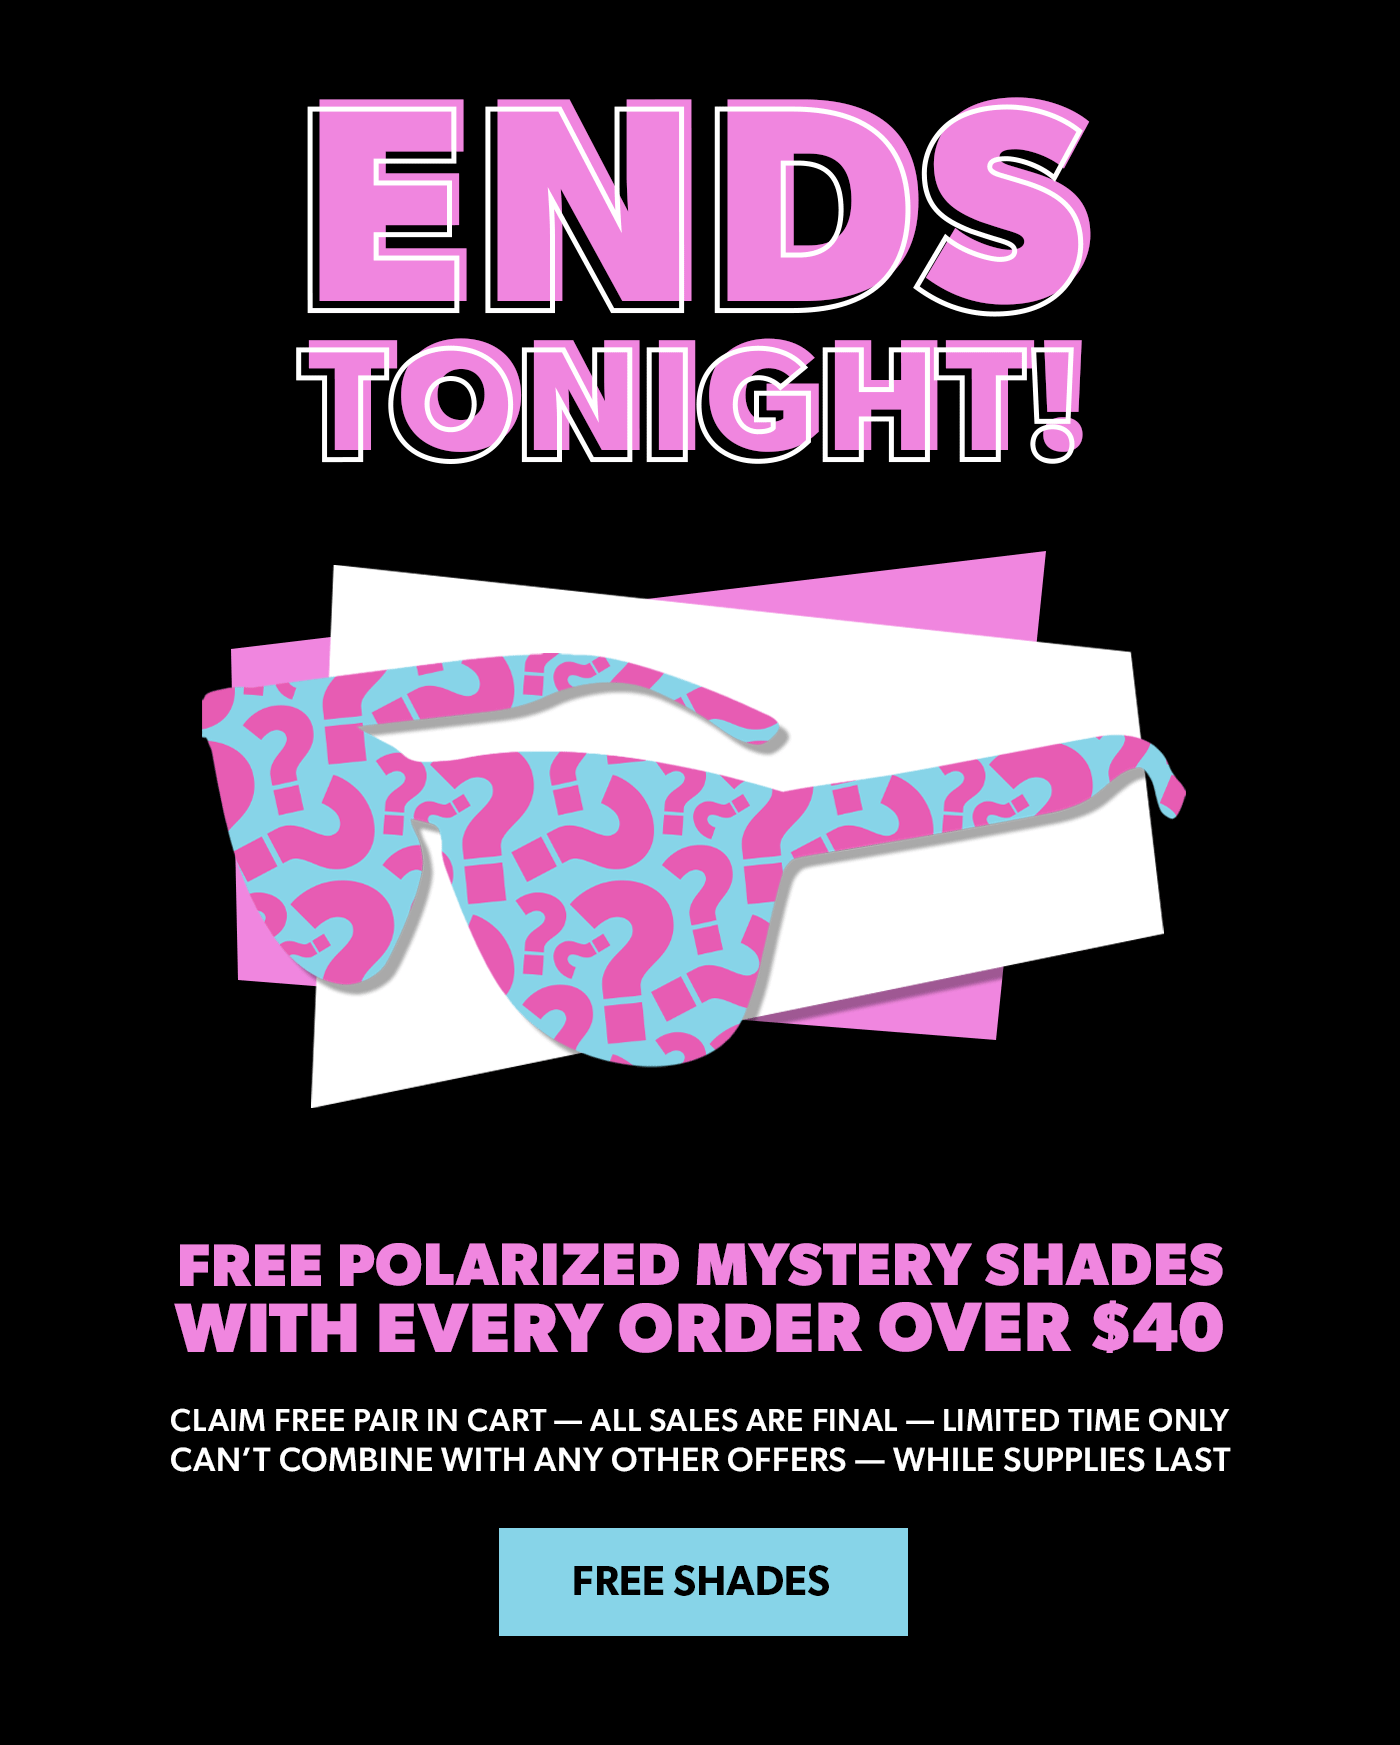 Free Polarized Mystery Shades With Orders Over $40